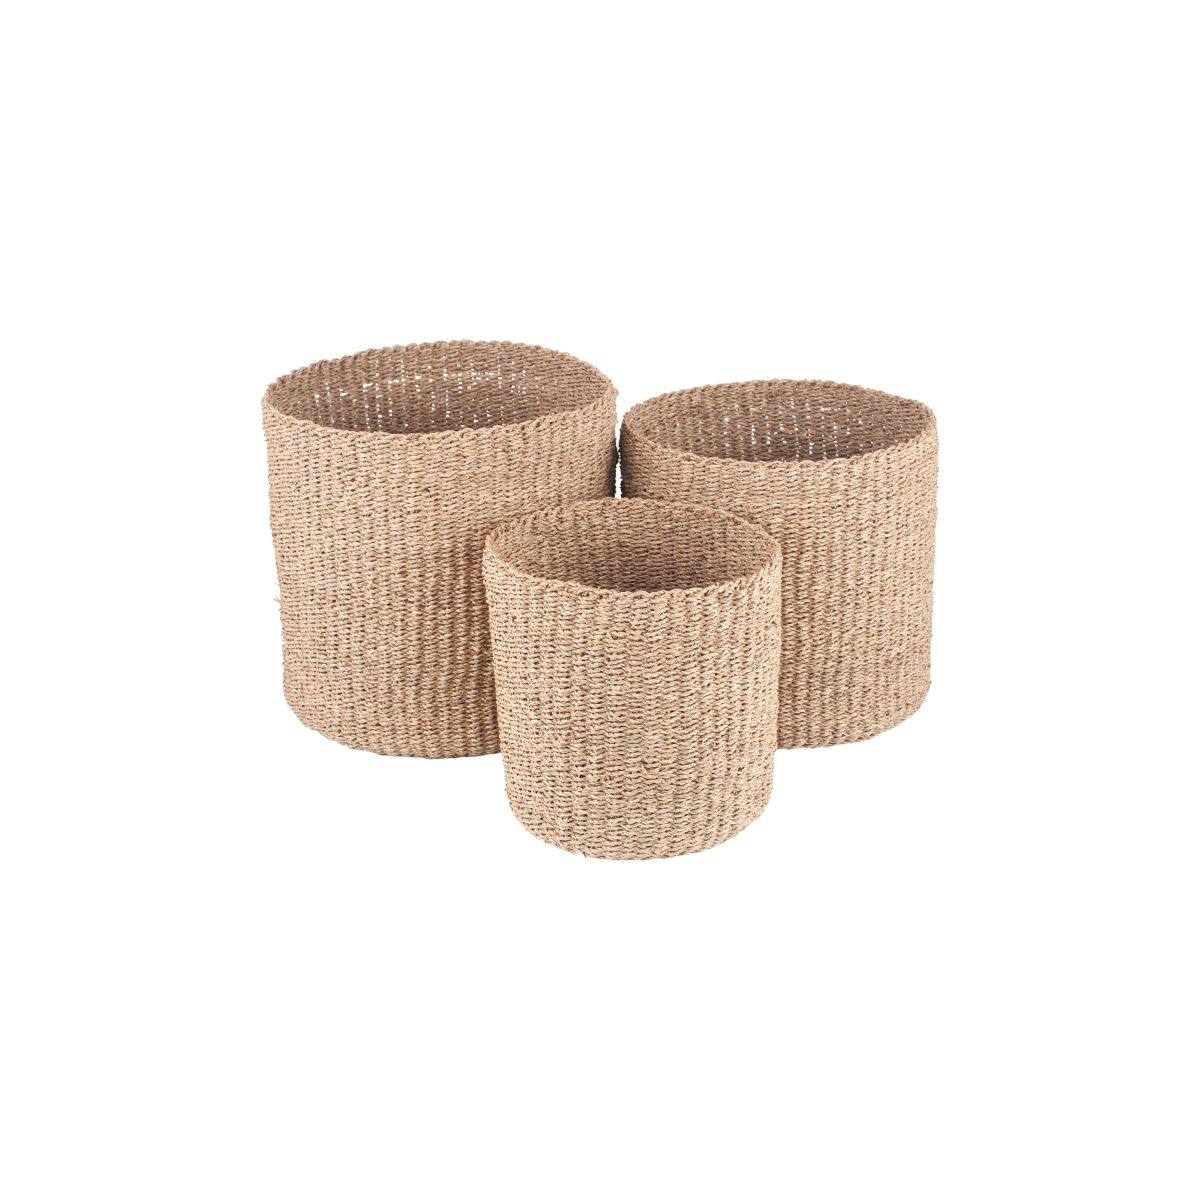 S/3 Woven Natural Seagrass Round Baskets